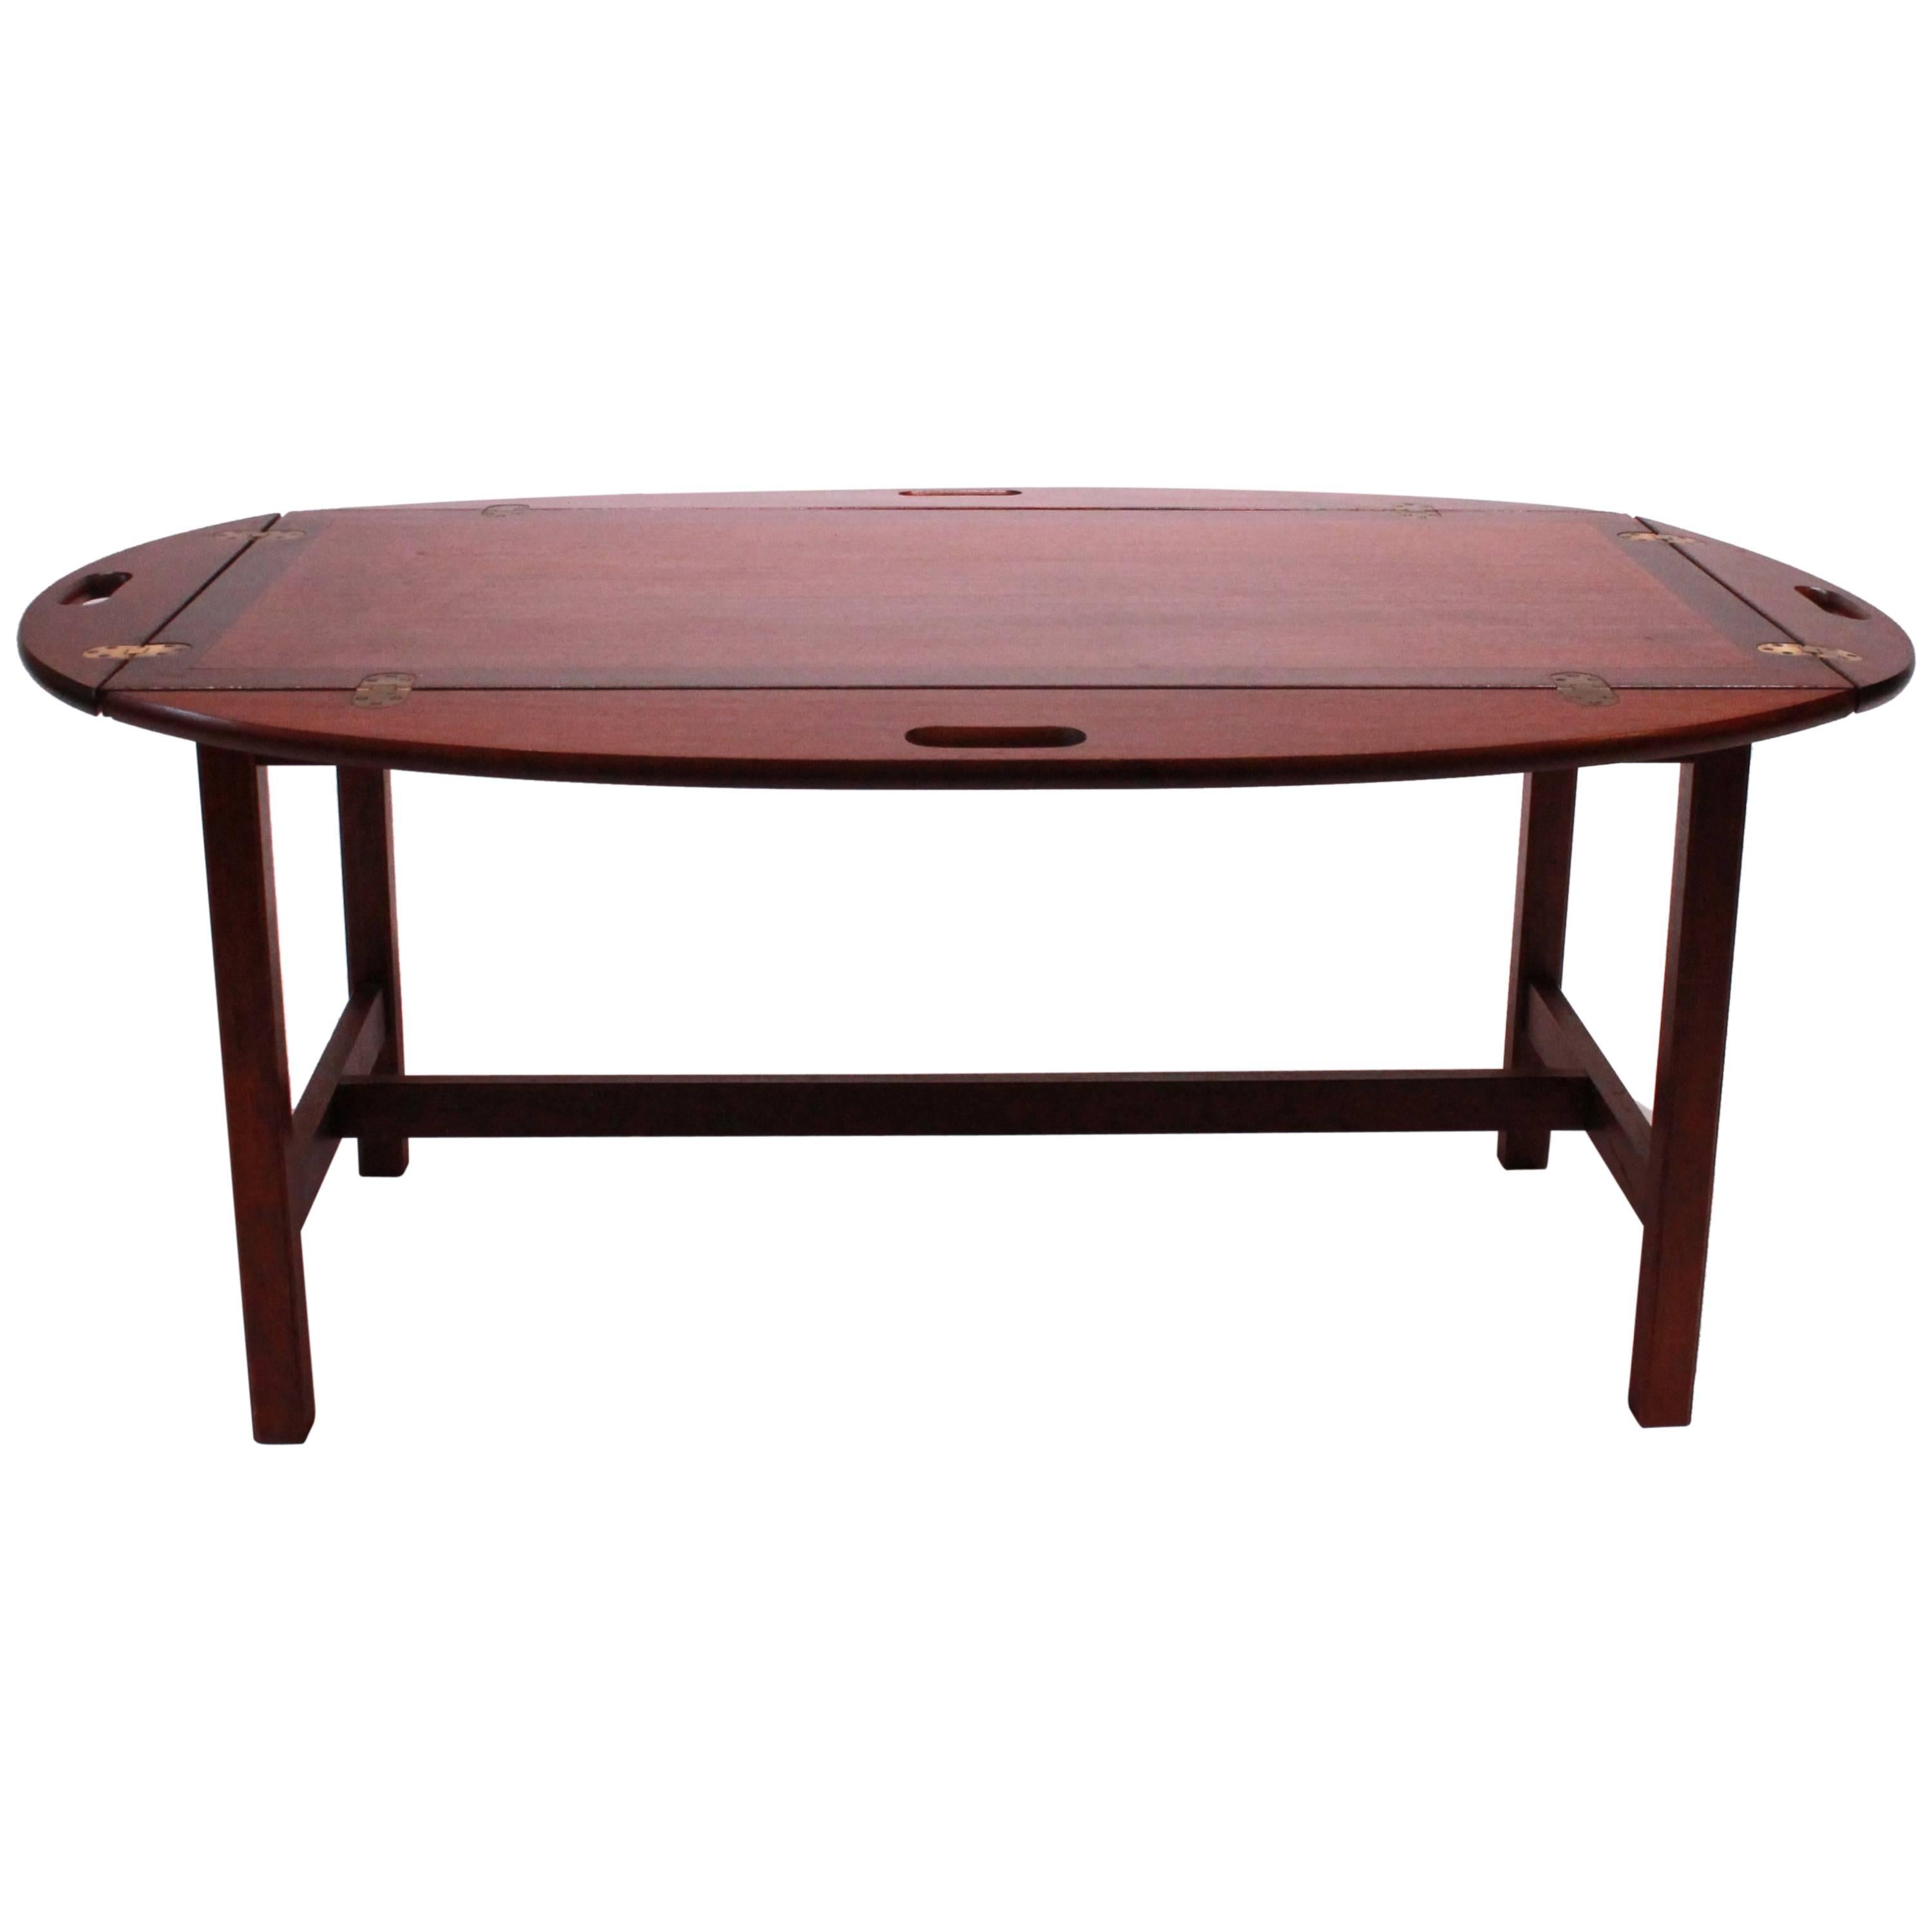 Butler's Tray in Polished Mahogany from the 1960s of Danish Design